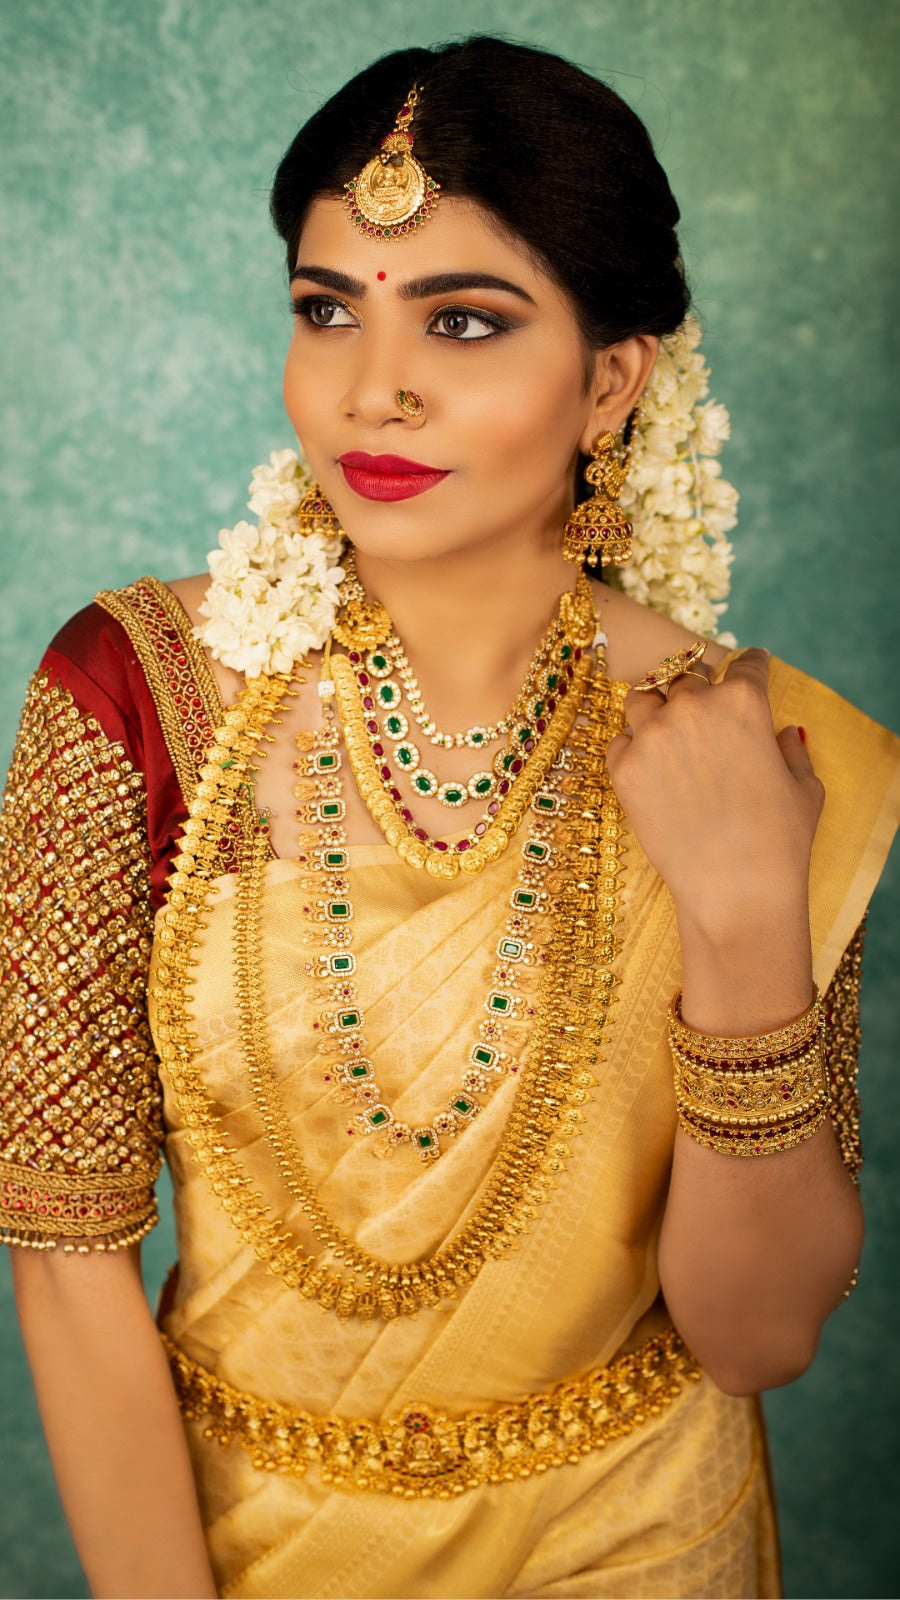 Nithilah Best Wedding Artificial Jewellery for an Indian Bride